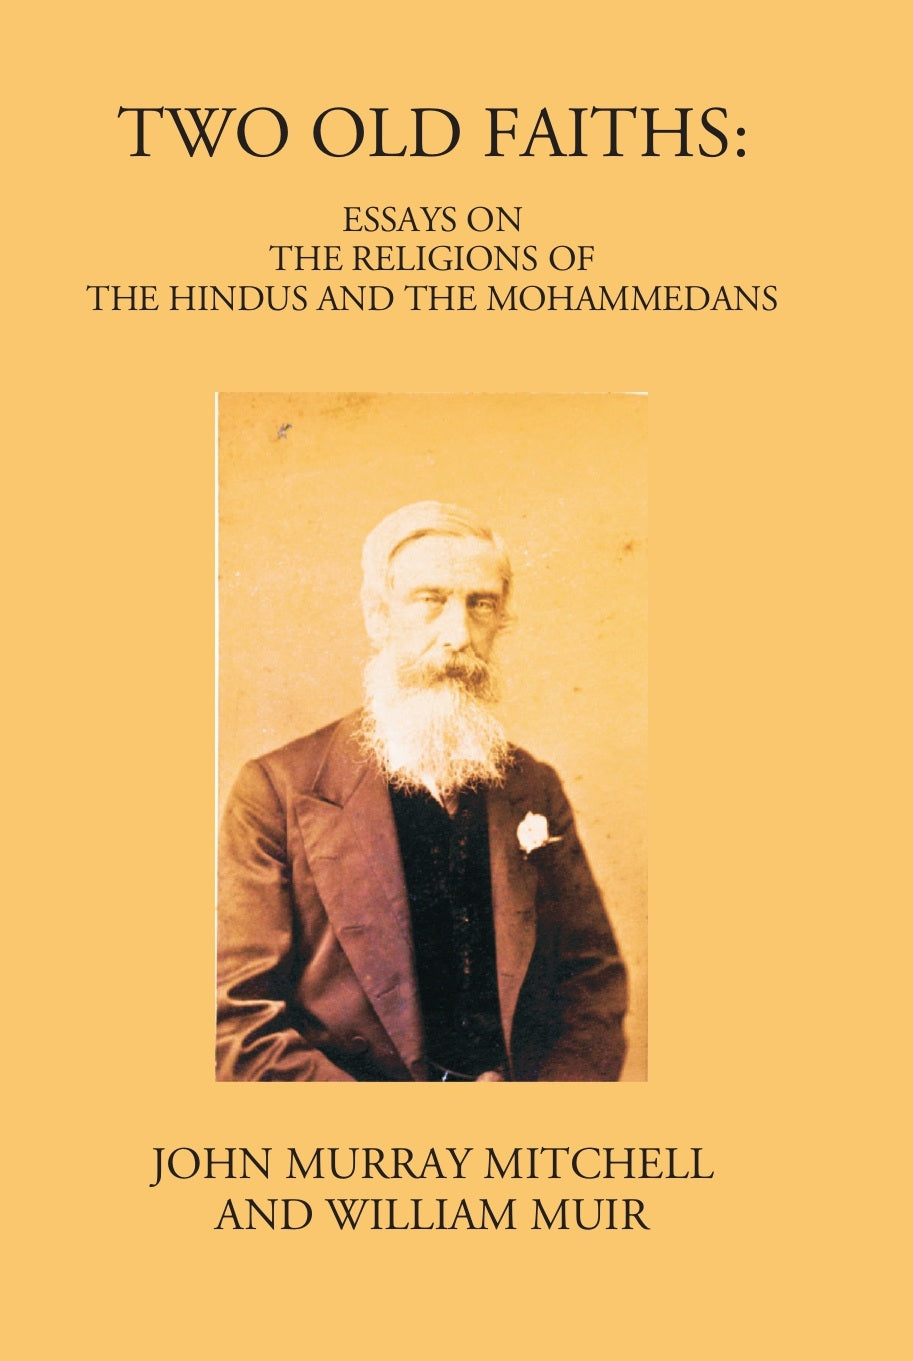 Two Old Faiths: Essays On The Religions Of The Hindus And The Mohammedans